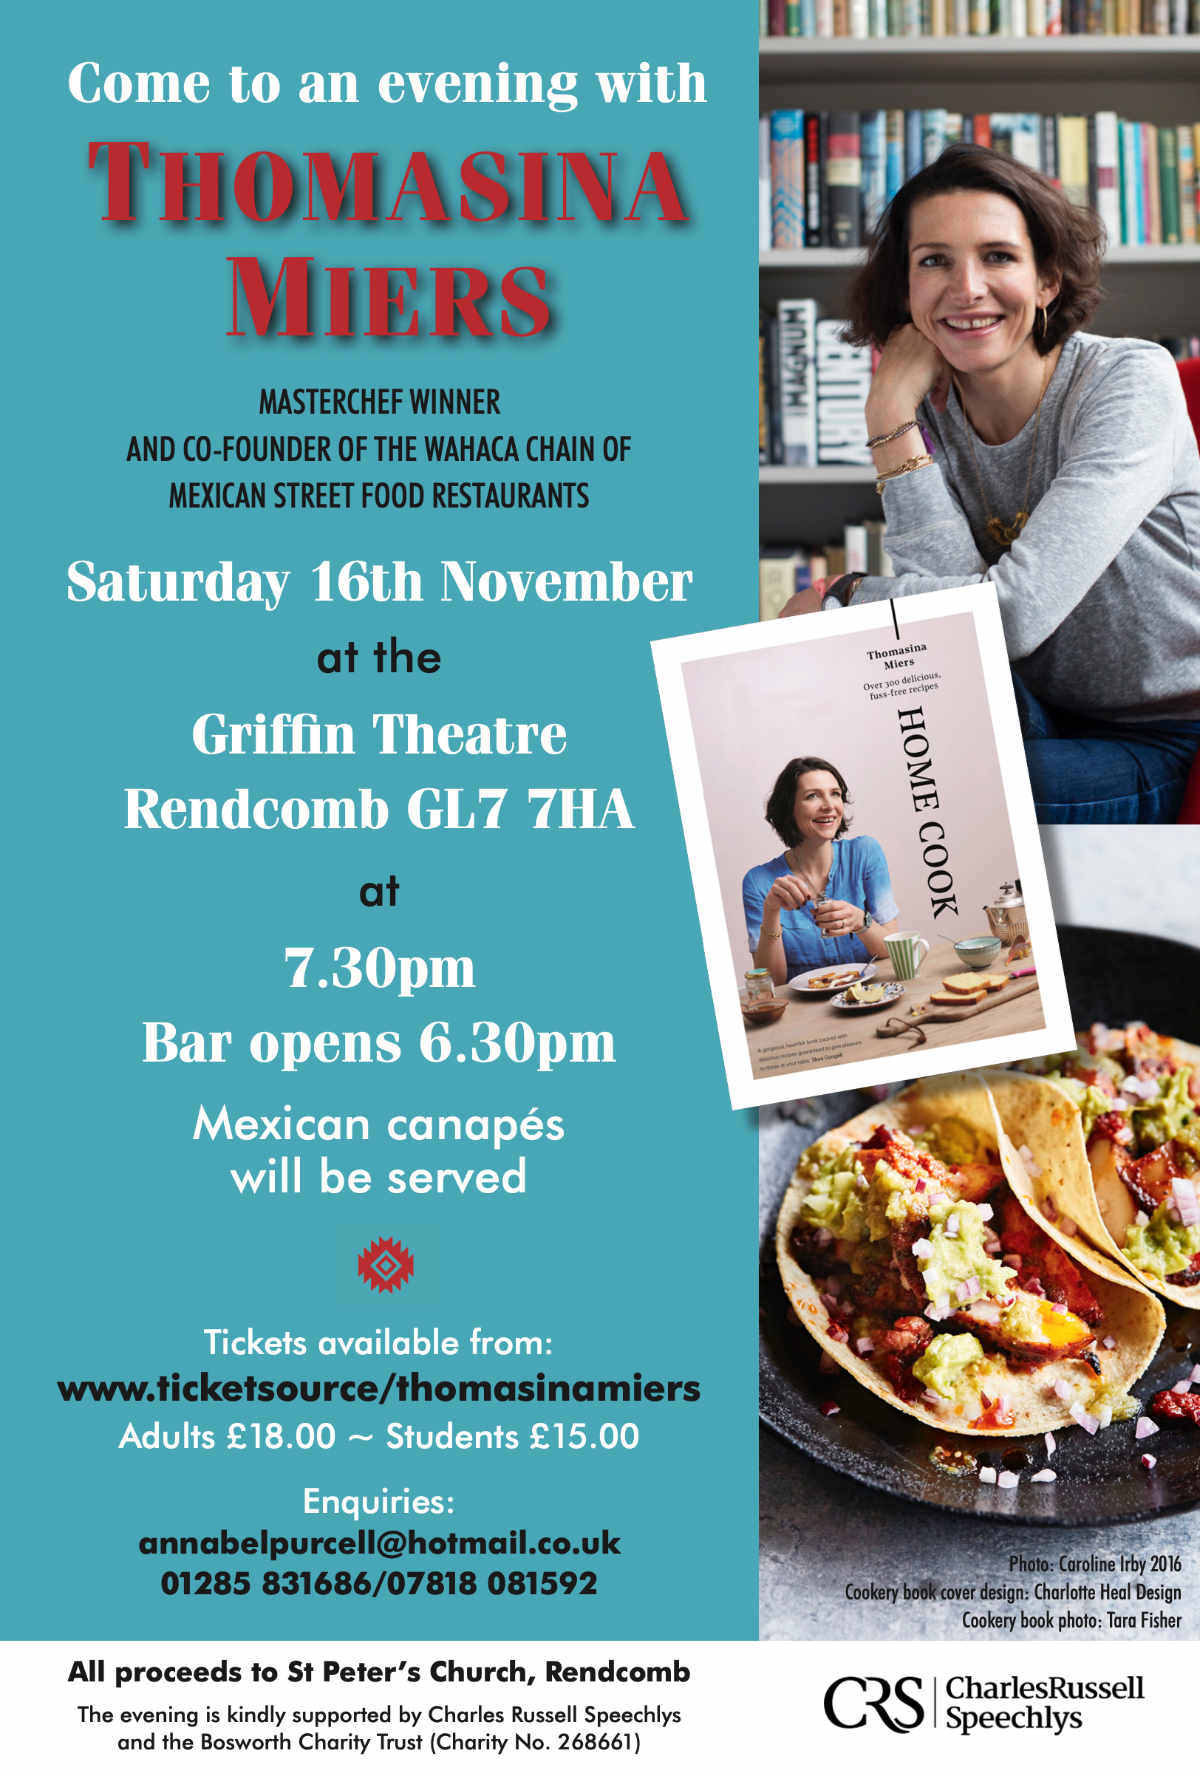 An Evening With Thomasina Miers